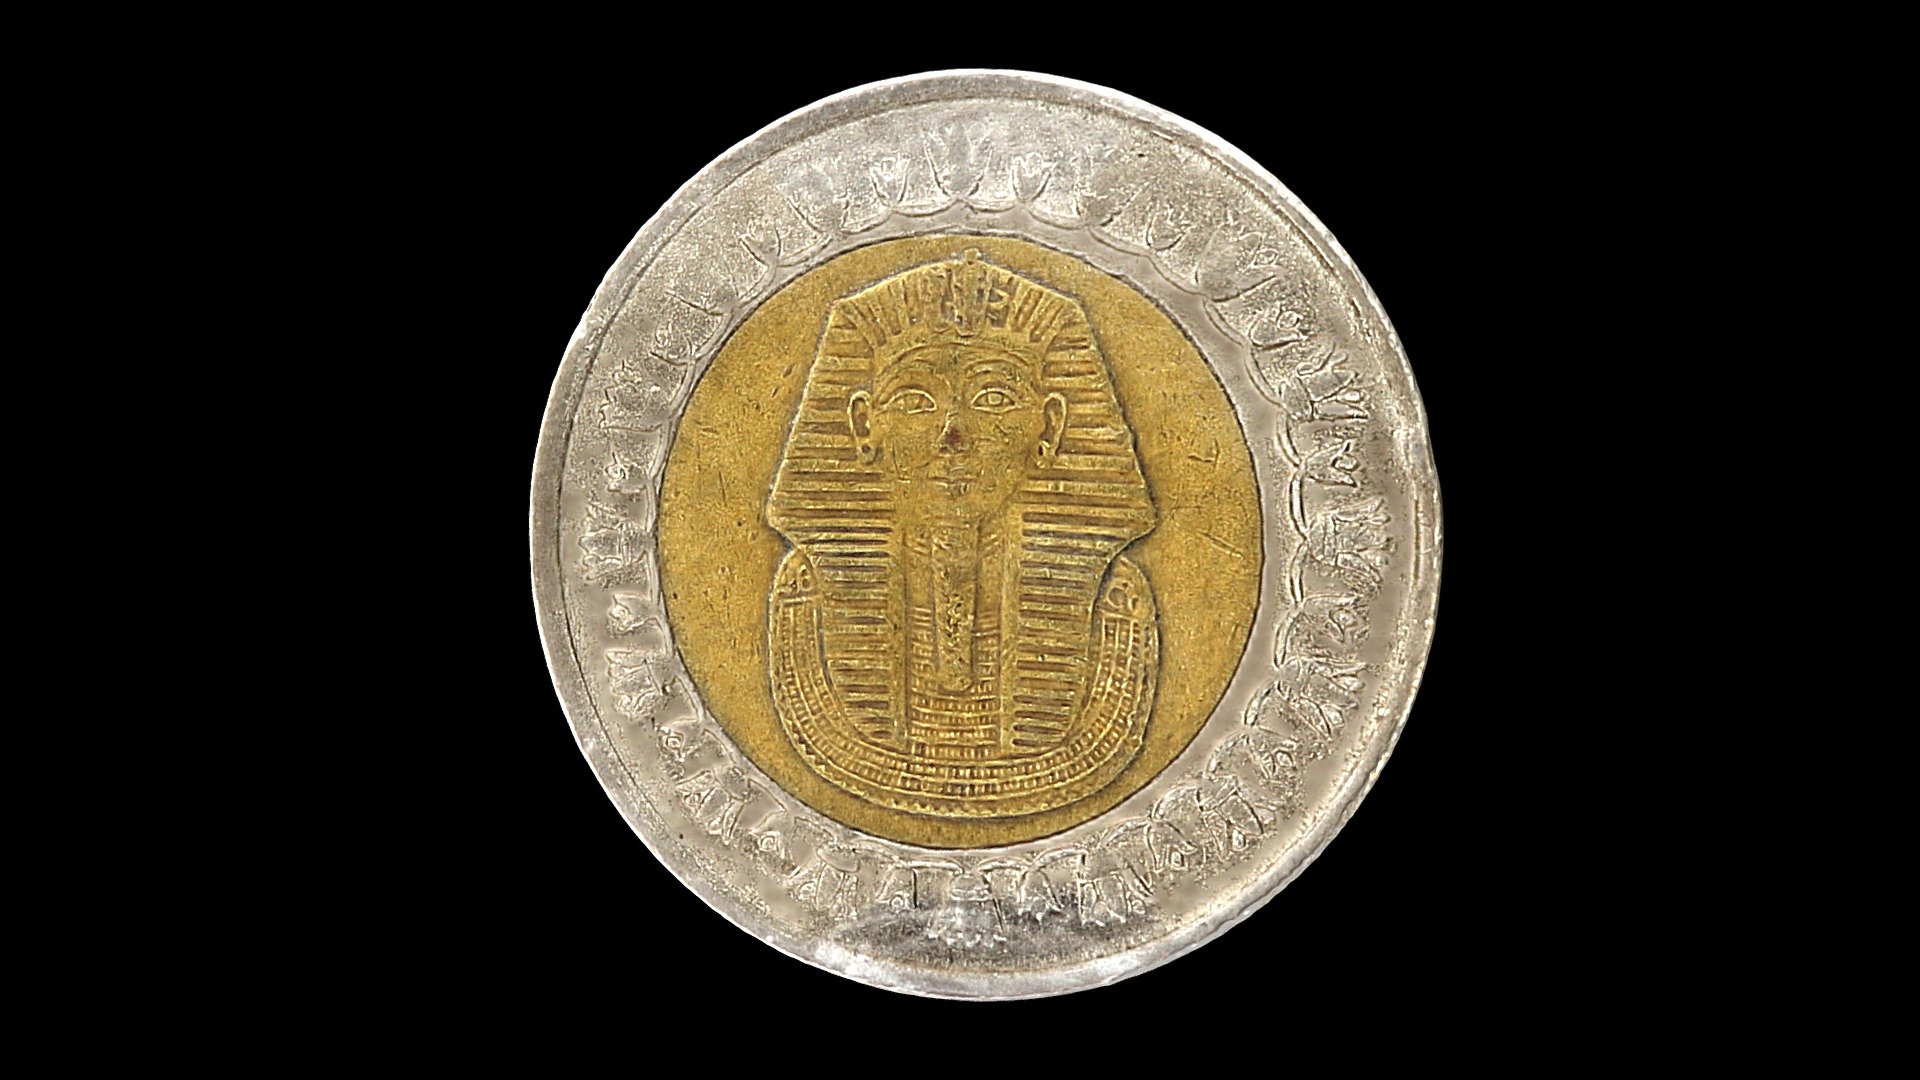 Moden Egyptian 1 pound coin dated to  A.H.14321 (A.D. 2010).  Coin is 2.5 cm in diameter.

First attempt at scanning a coin.  No cross polarization used.

Created from 288 photographs (Canon EOS Rebel T7i, 55mm lens) using Metashape 1.8.4 3d model